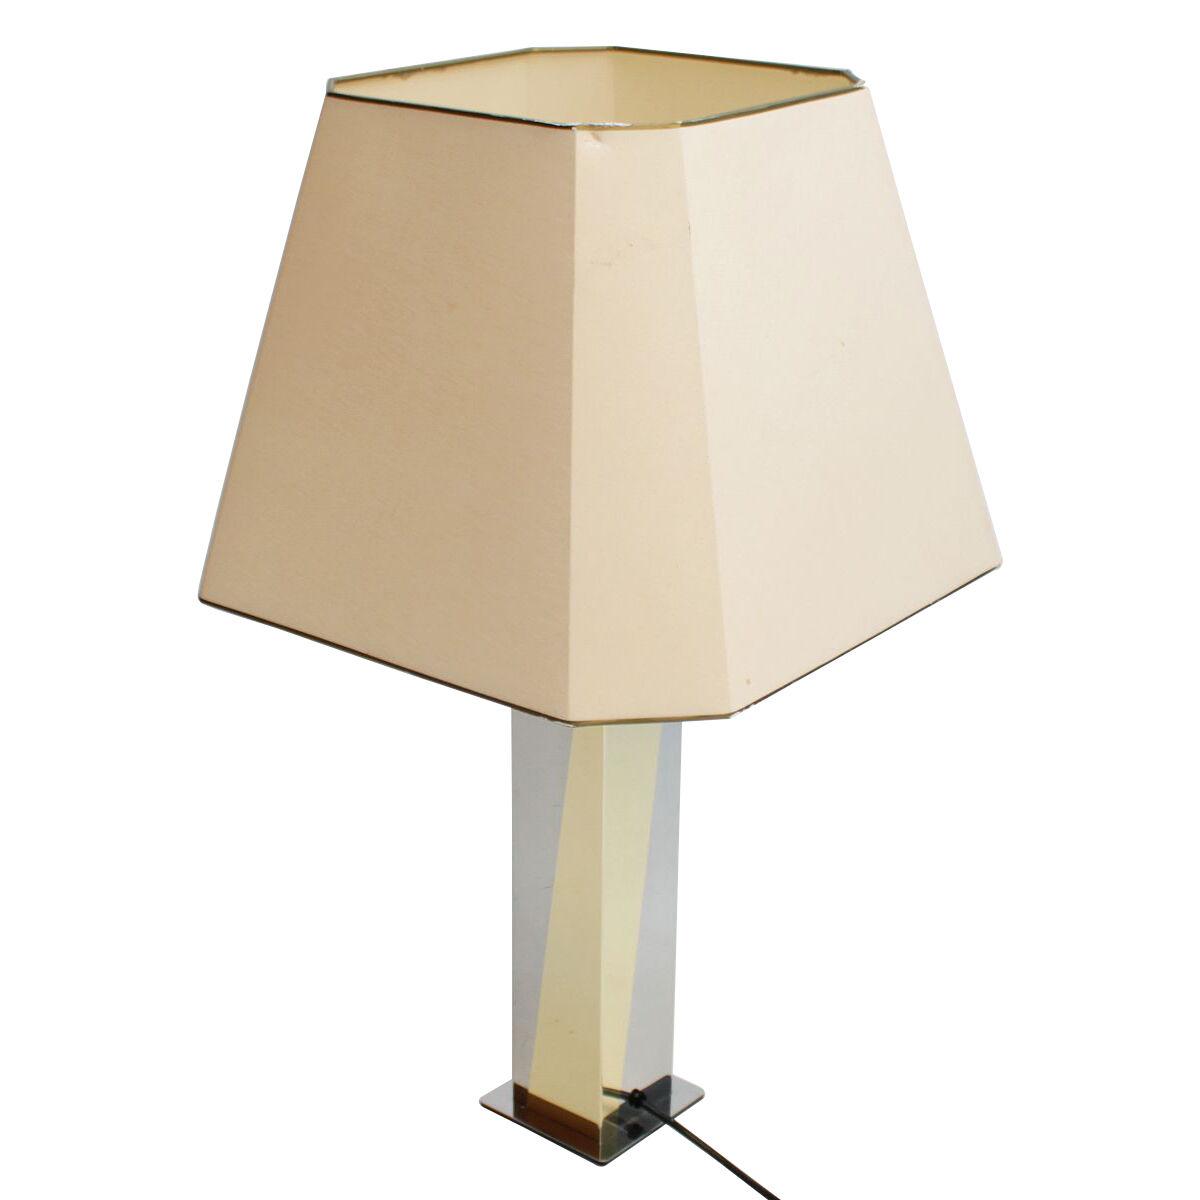 Architectural Table Lamp in the manner of Paul Evans